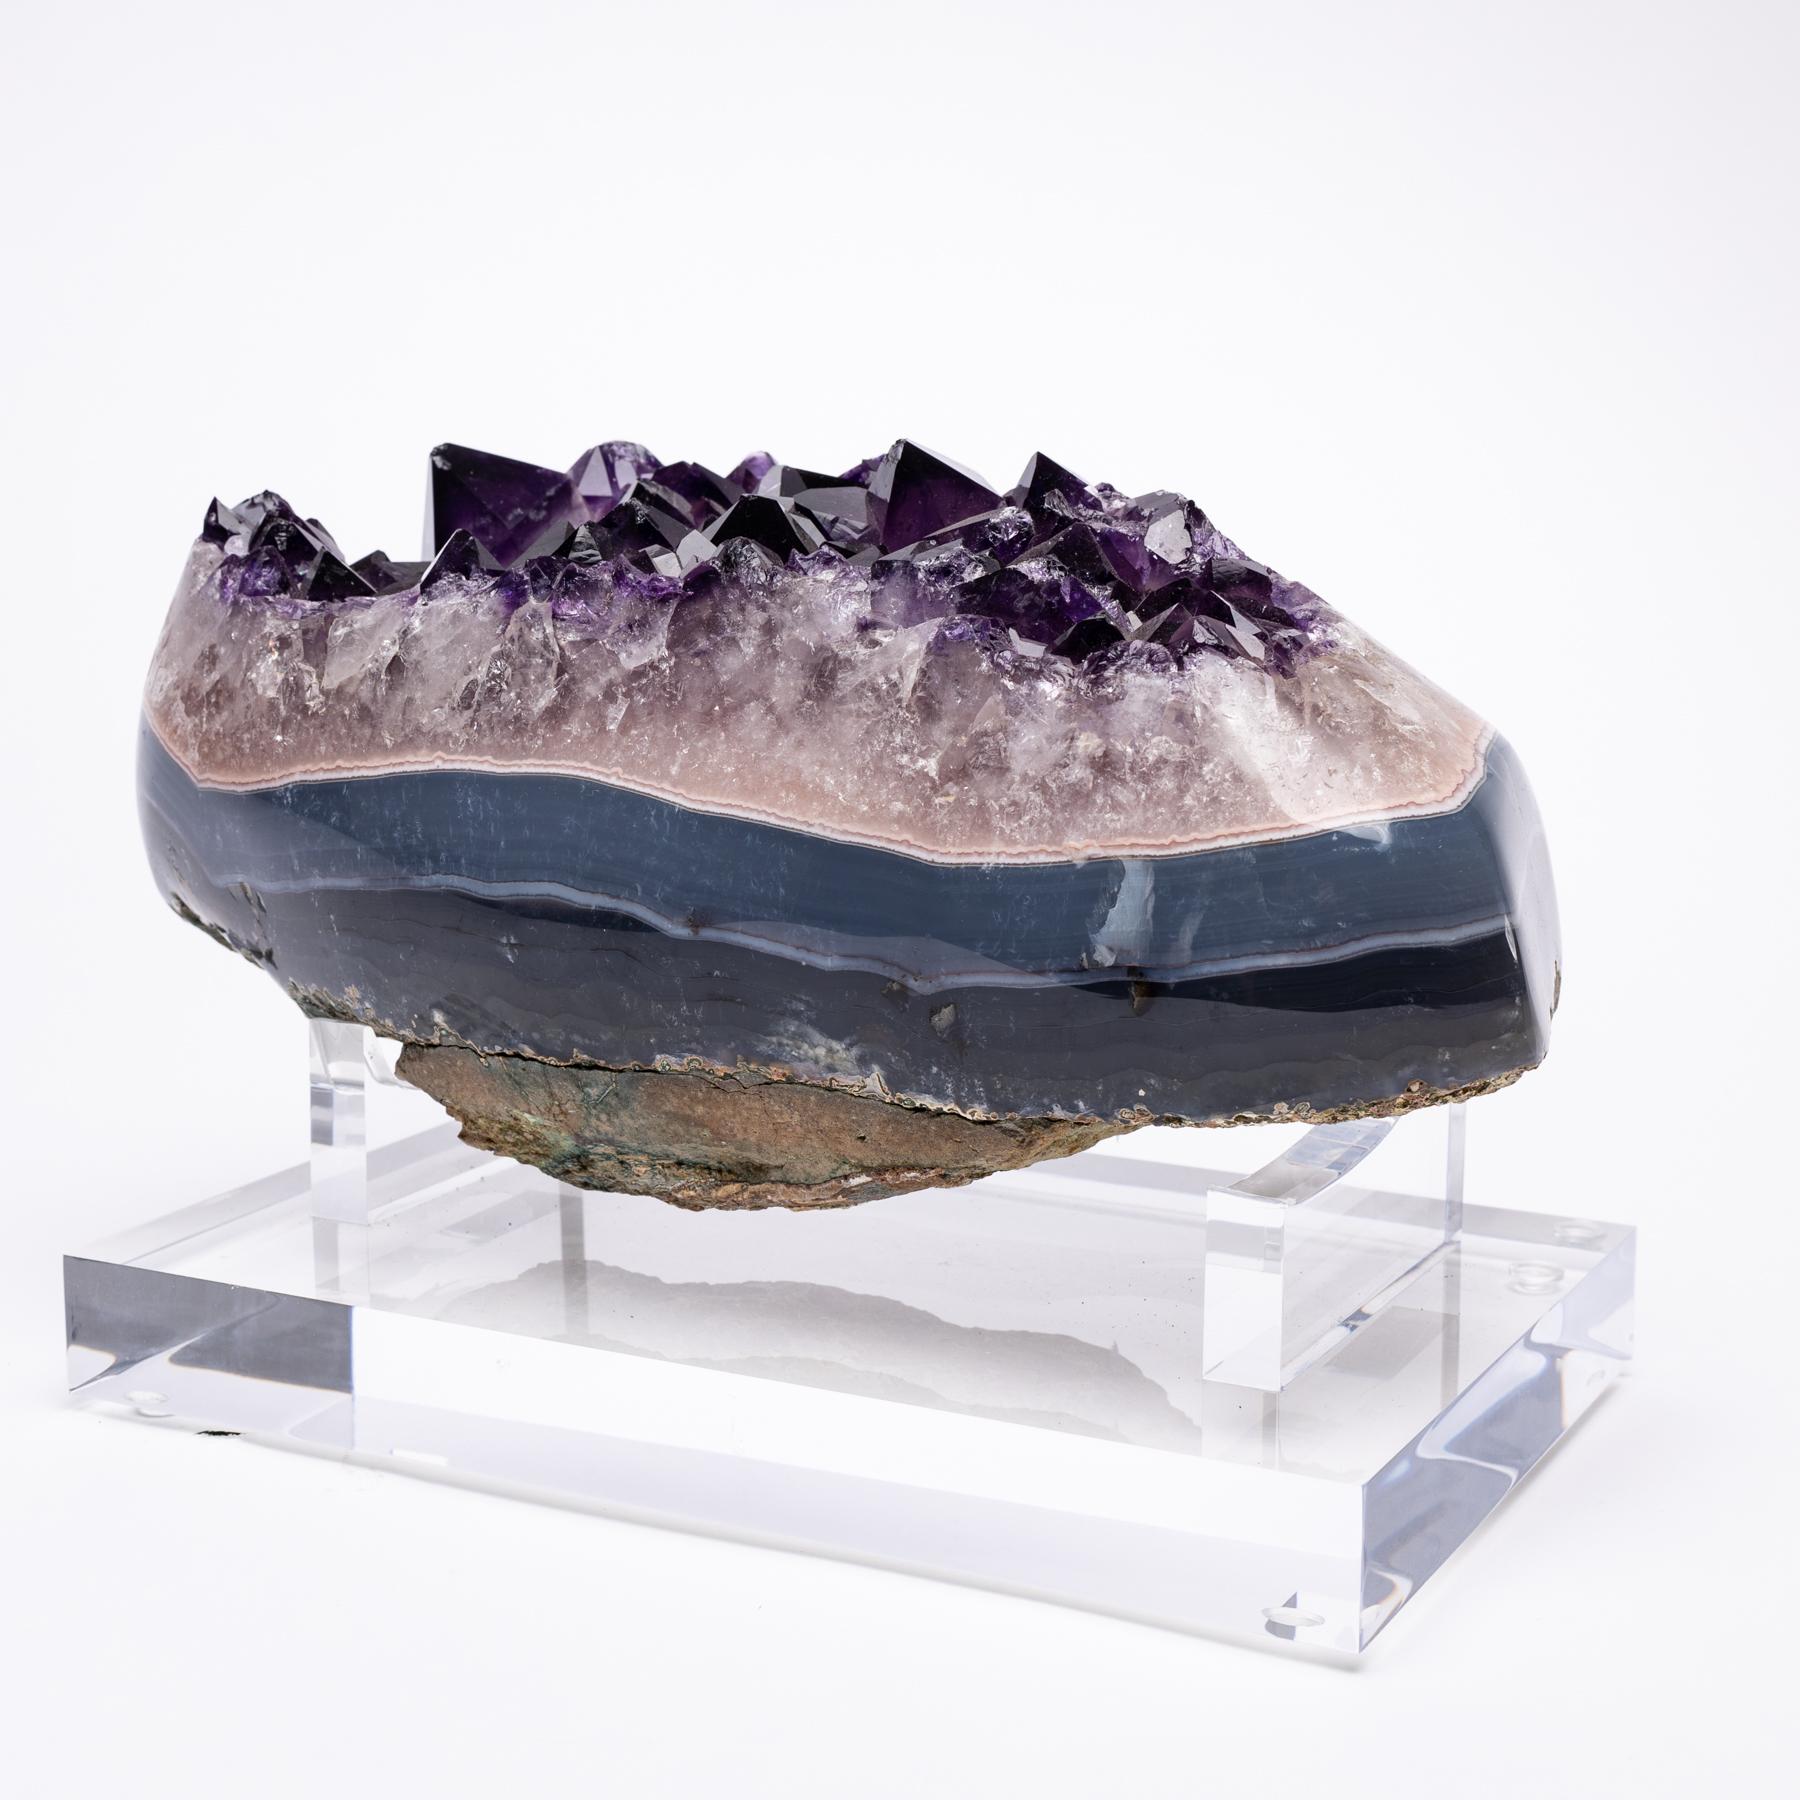 Origen: Uruguay
Colors: Blue, white and purple
Agates are formed in rounded nodules, which are sliced open to bring out the internal pattern hidden in the stone. Their formation is commonly from depositions of layers of silica filling voids in